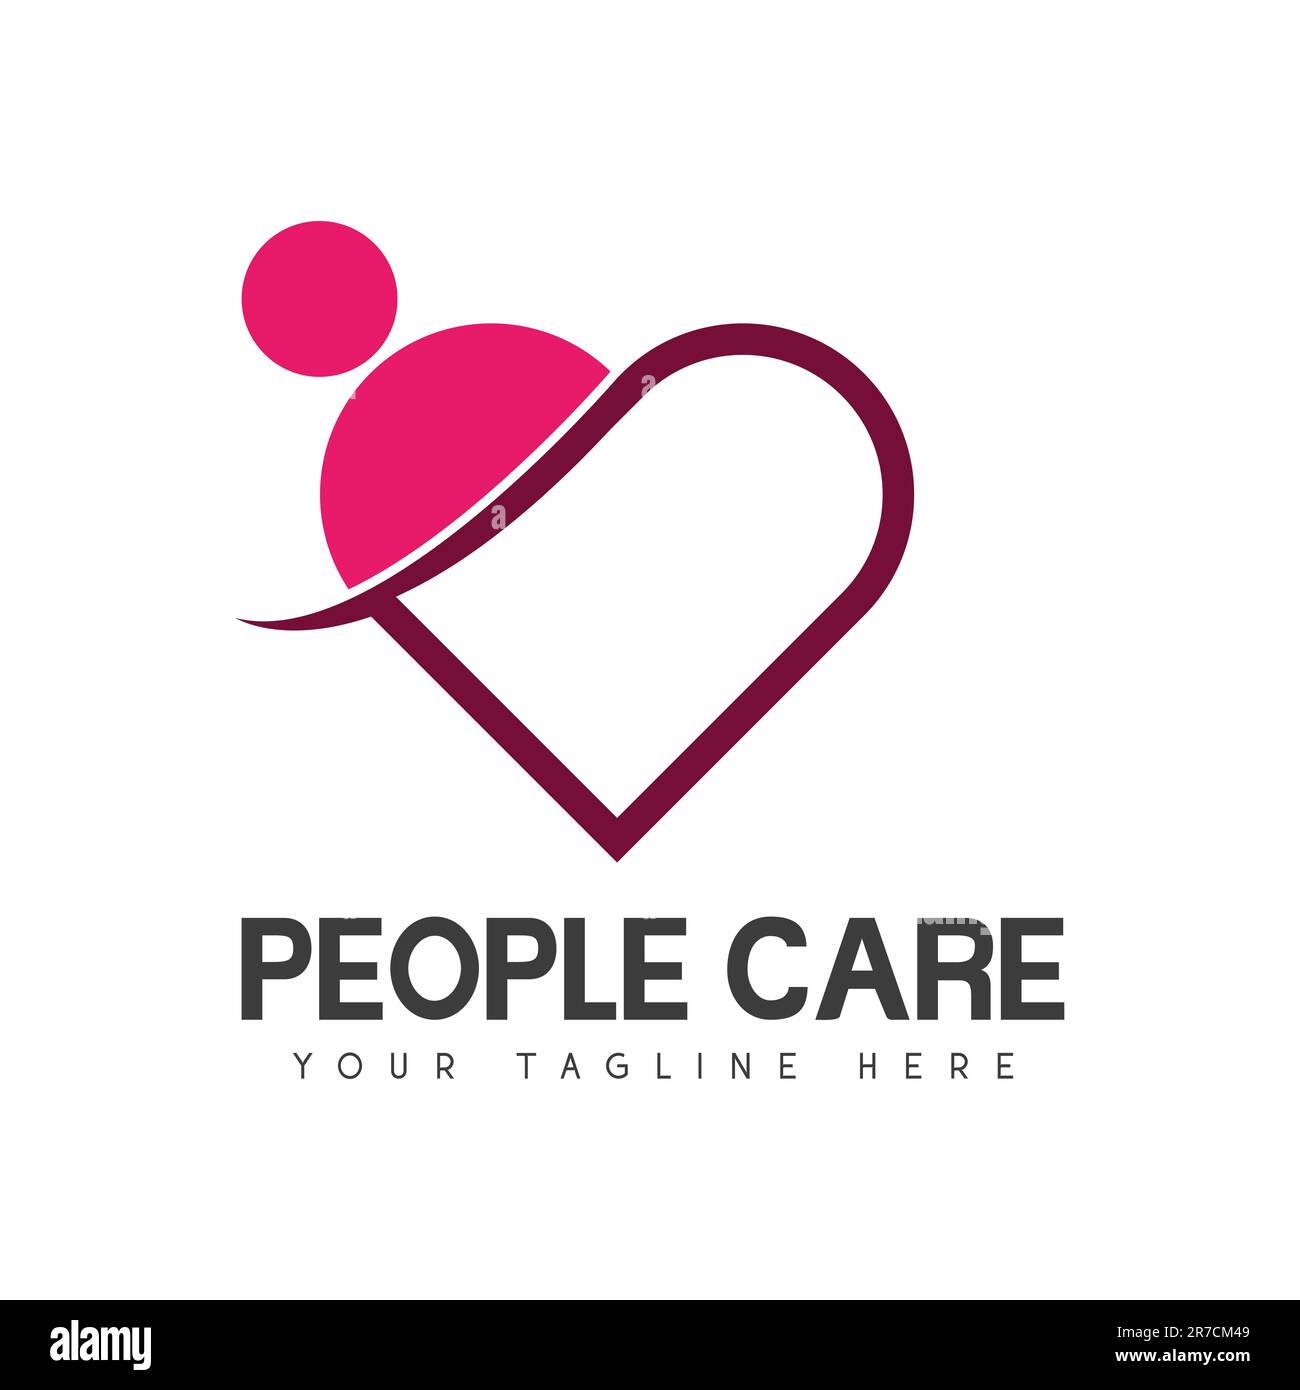 Heart People Care Logo Design Charity Donation Logotype People Love Heart Stock Vector